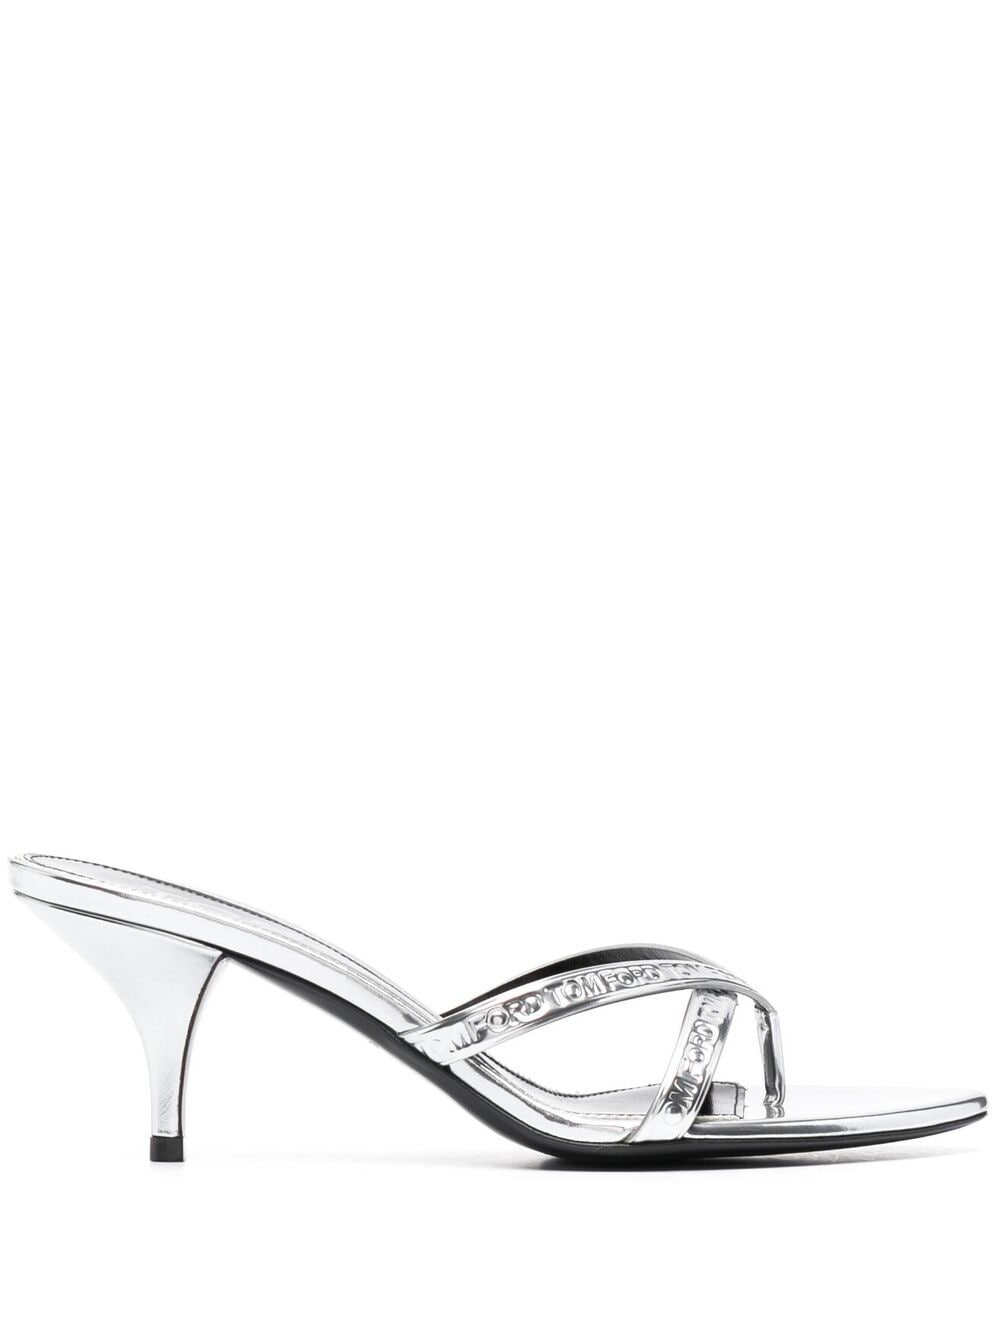 TOM FORD metallic leather mules - Silver von TOM FORD